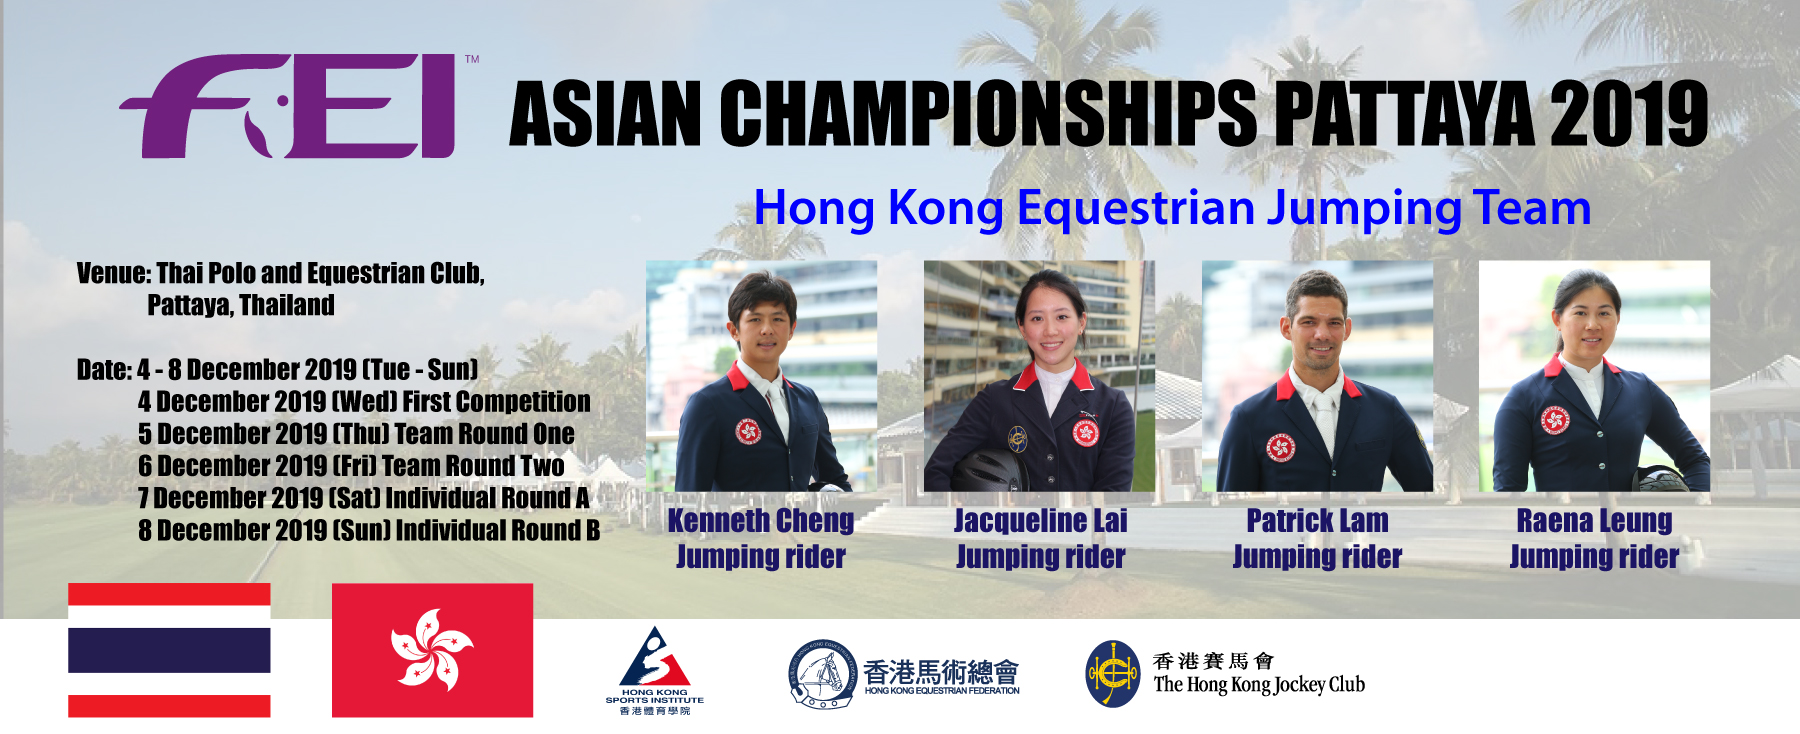 Selected-Jumping-riders-for-Asian-Championship1